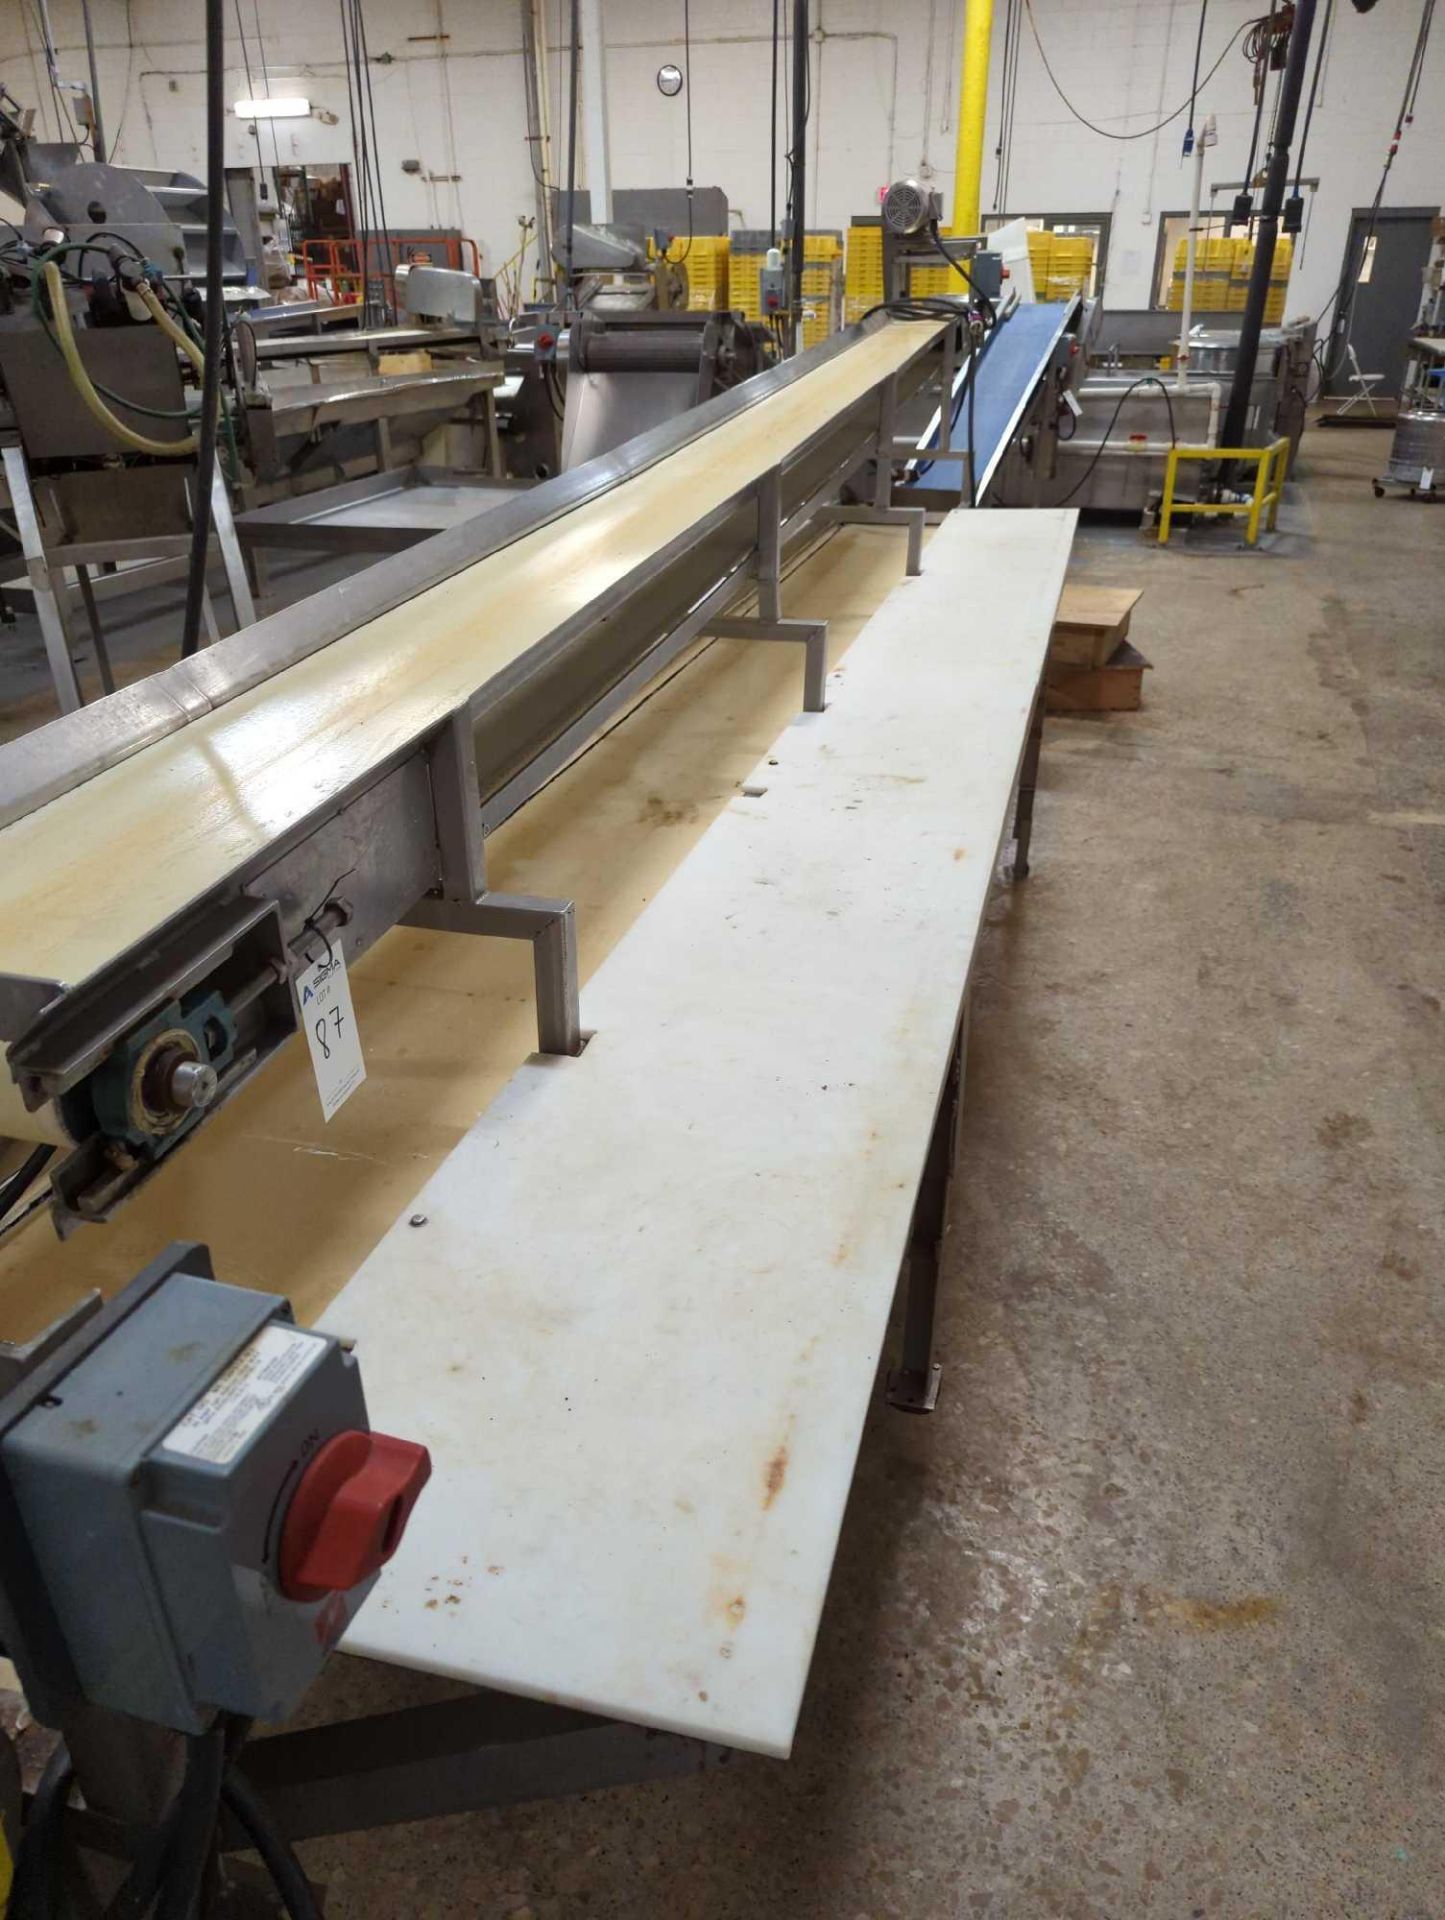 Inspection Belt Conveyors With Cutting Boards - Image 11 of 12